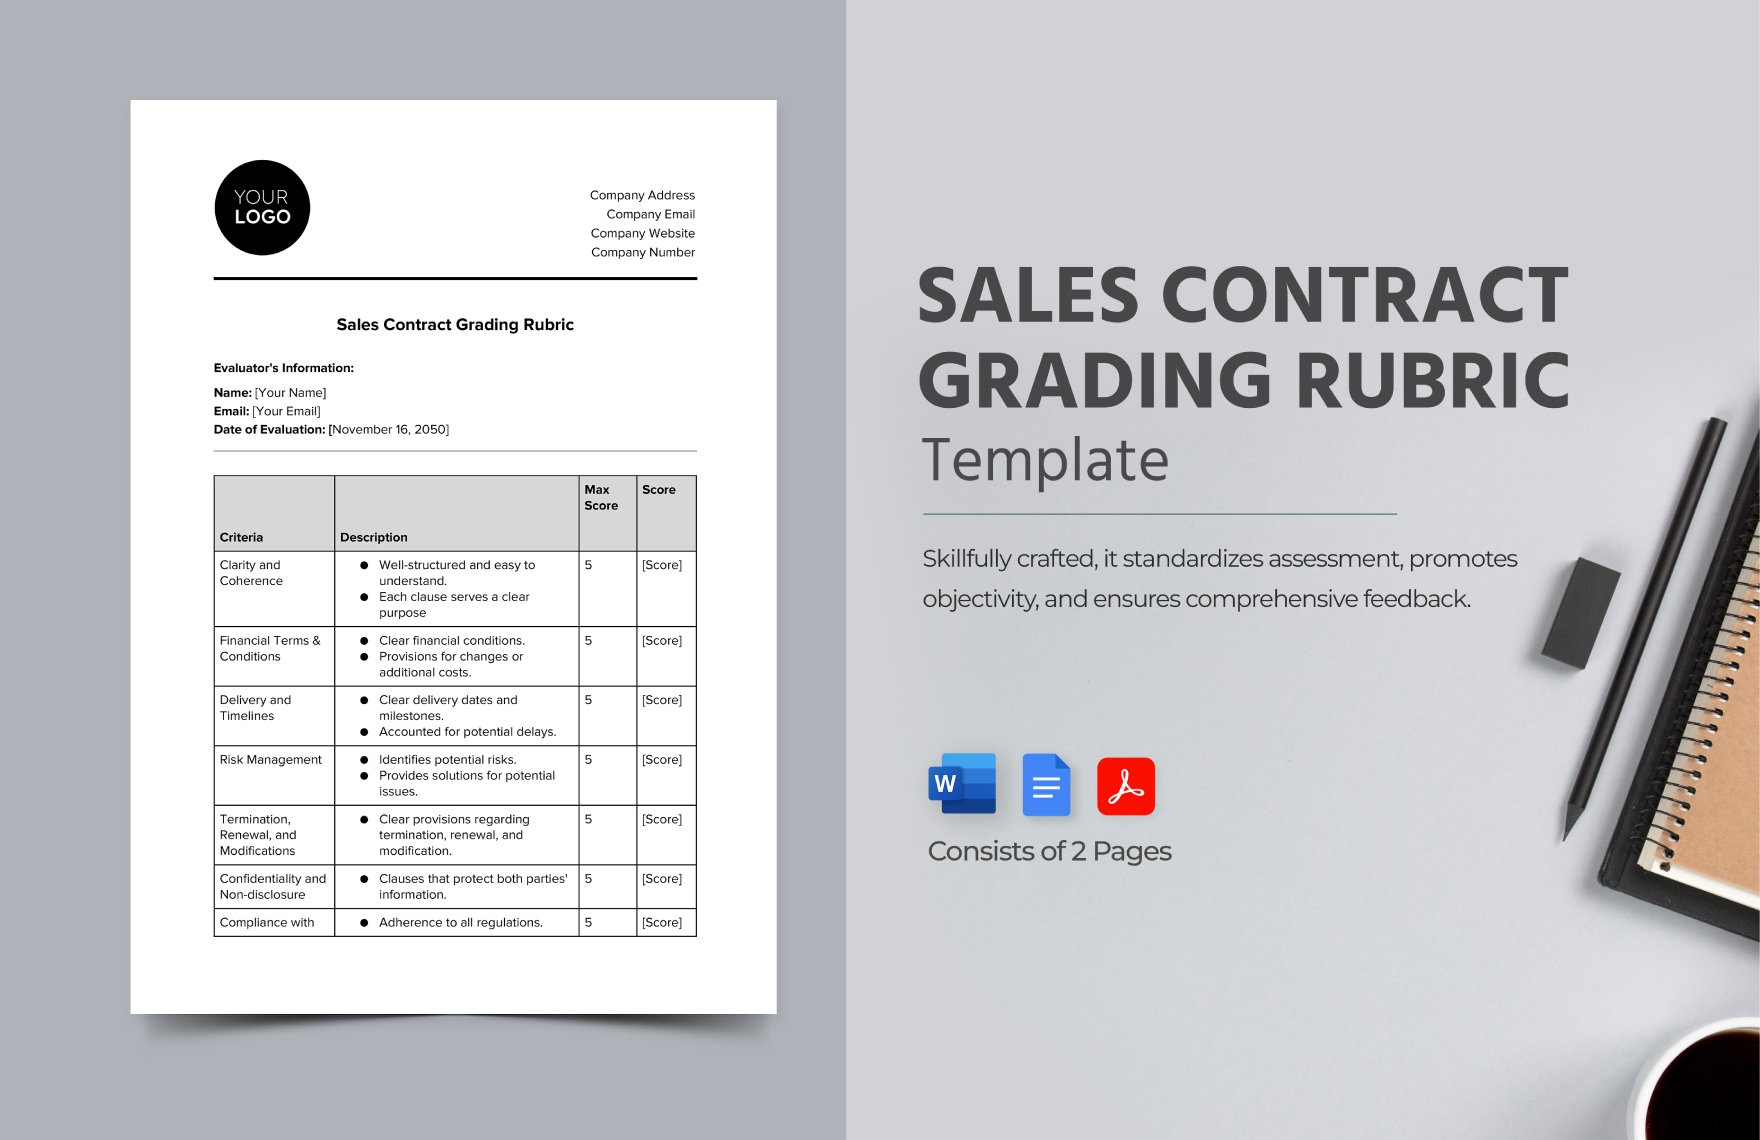 Sales Contract Grading Rubric Template in Word, Google Docs, PDF